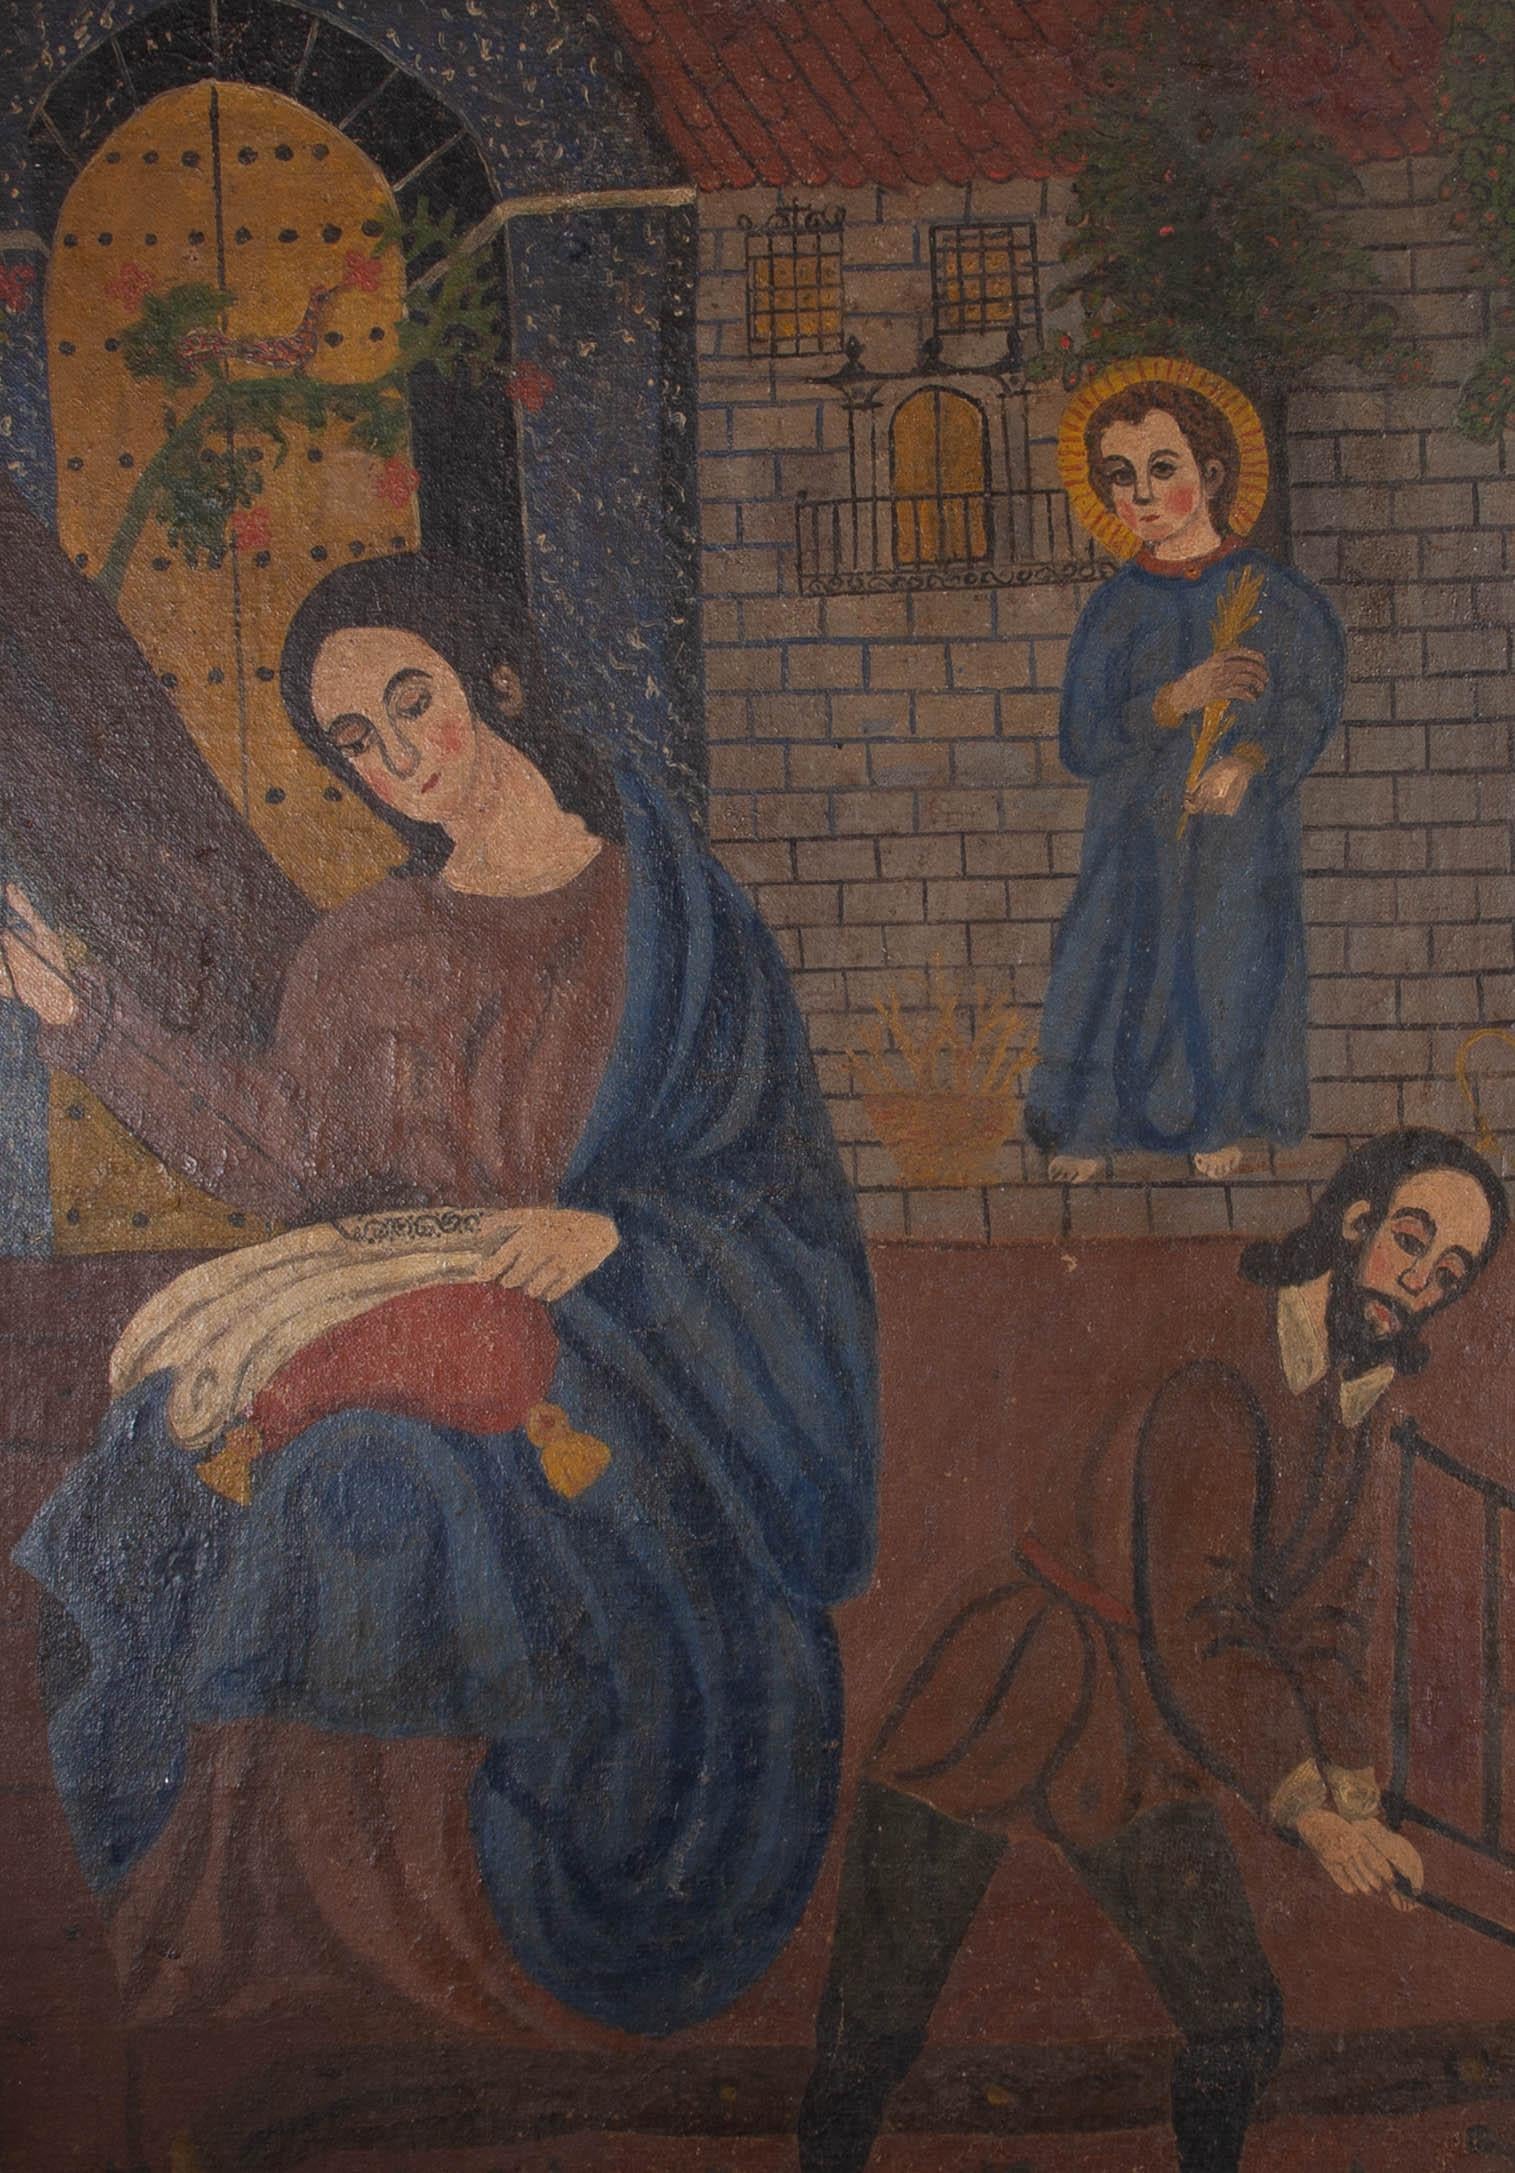 A truly unique piece, this large, early 20th Century fresco style oil has exquisite naive charm. The scene shows the Annunciation with Angel Gabriel, bringing a martyrs palm to Mary as she and Joseph sew and toil the land. The painting has nods to